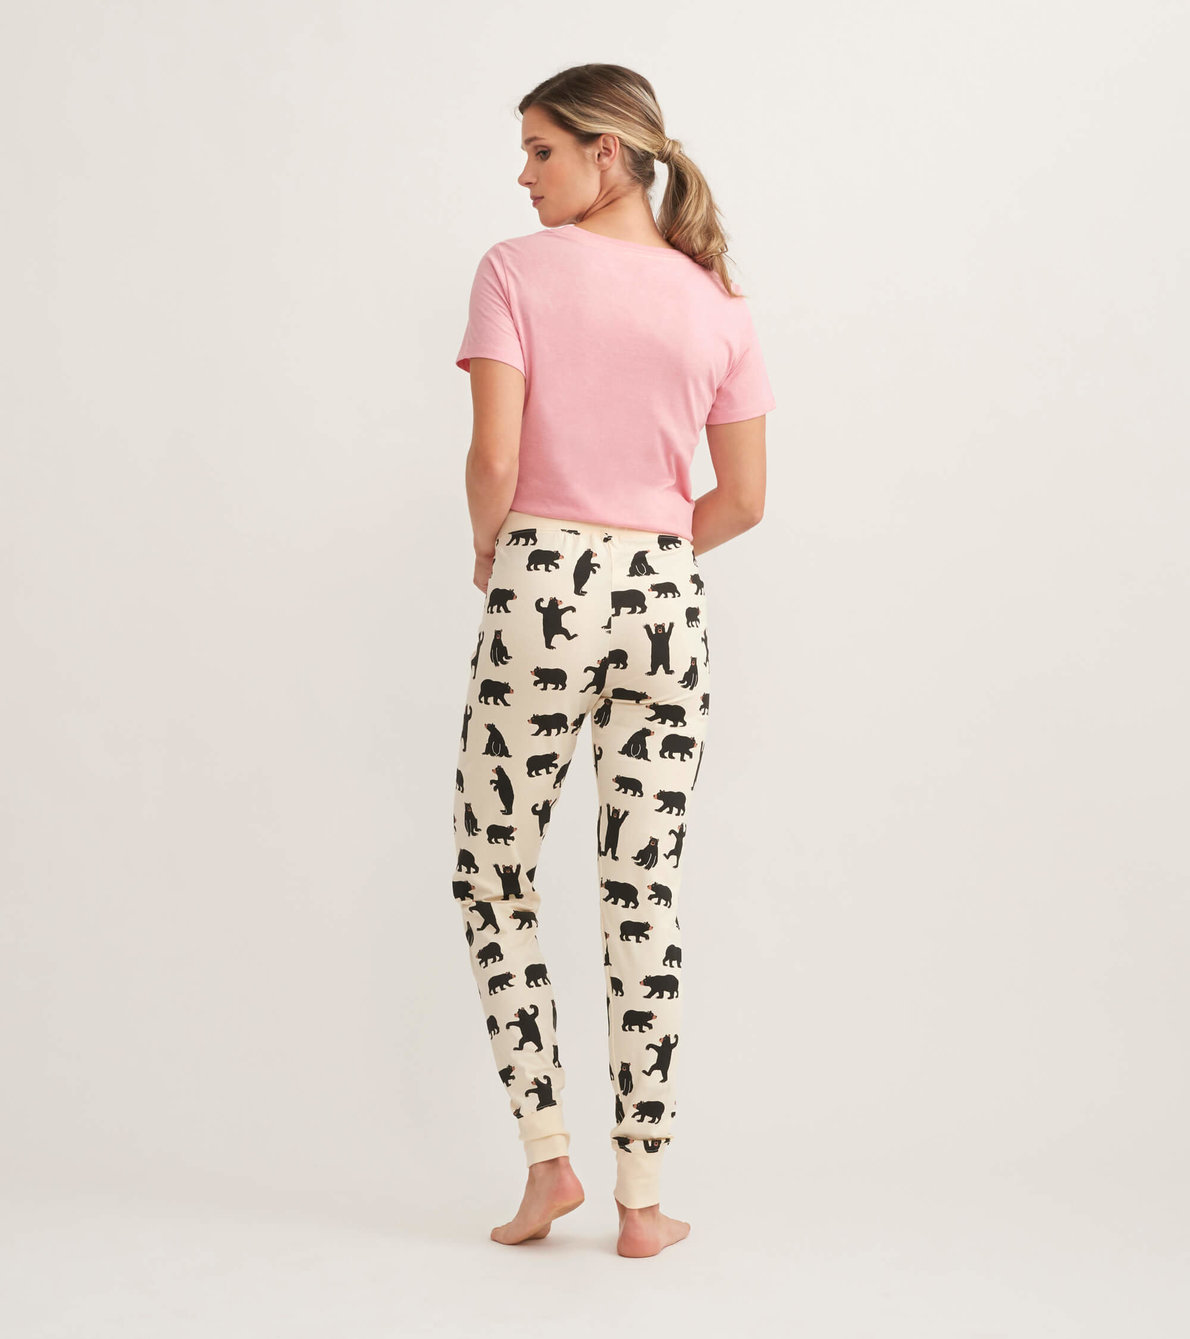 View larger image of Classic Bears Women's Tee and Leggings Pajama Separates